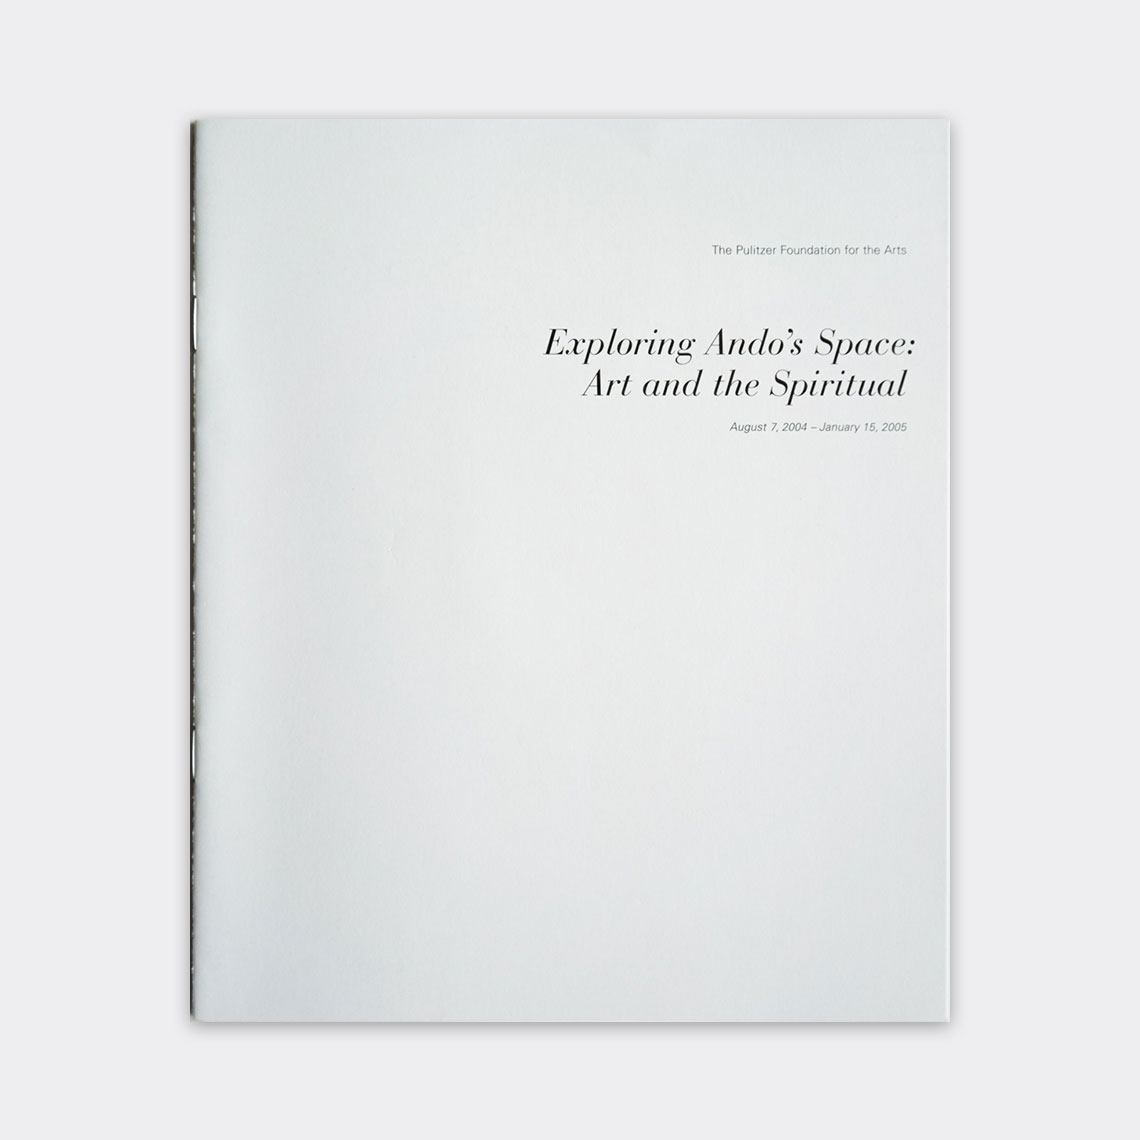 The exhibition catalogue cover for "Exploring Ando's Space: Art and the Spiritual."